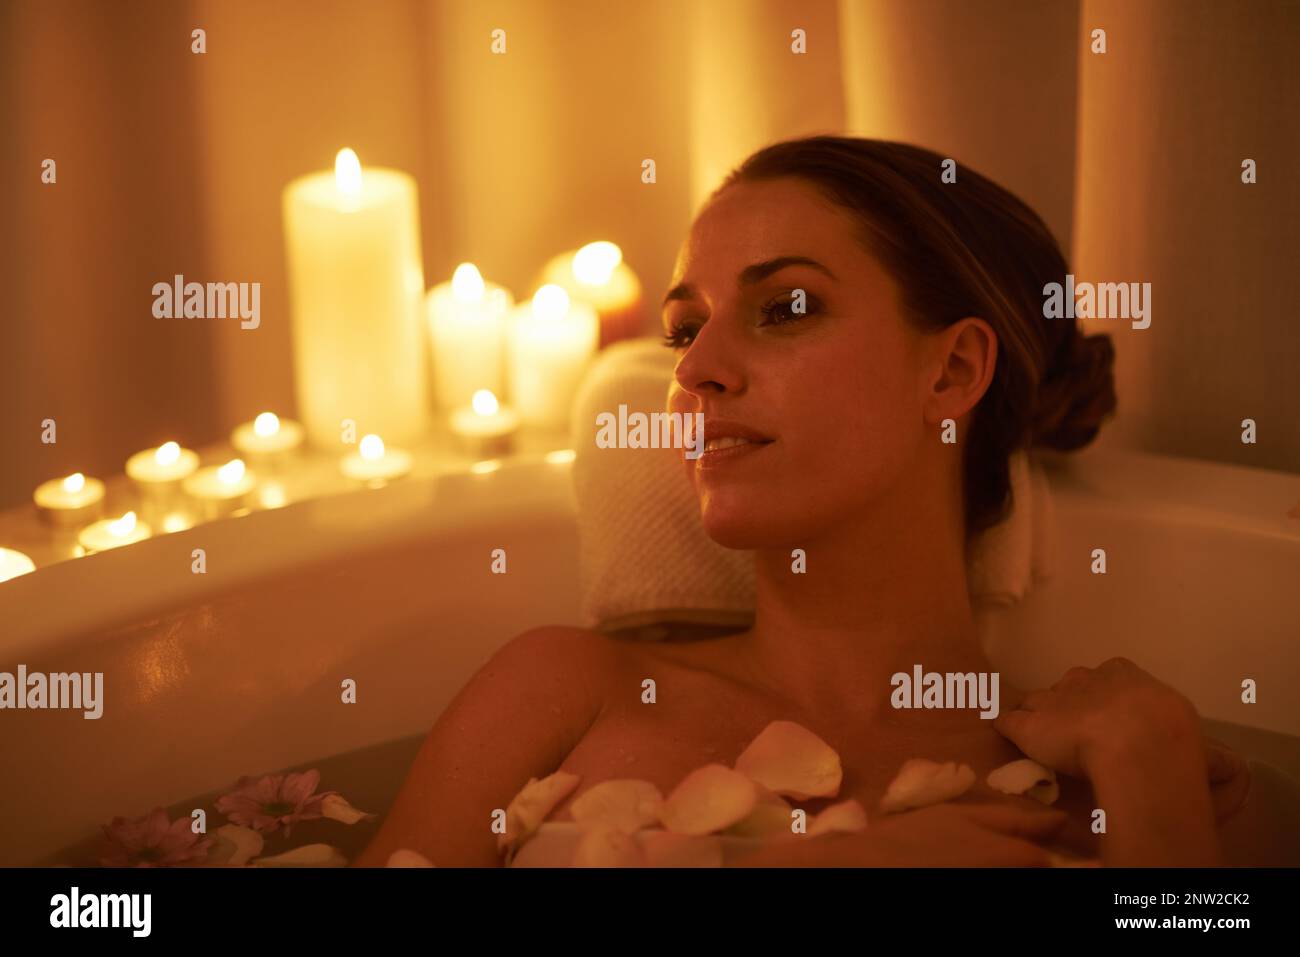 https://c8.alamy.com/comp/2NW2CK2/soothed-by-the-ambiance-and-a-hot-bath-cropped-shot-of-a-gorgeous-woman-relaxing-in-a-candle-lit-bath-2NW2CK2.jpg